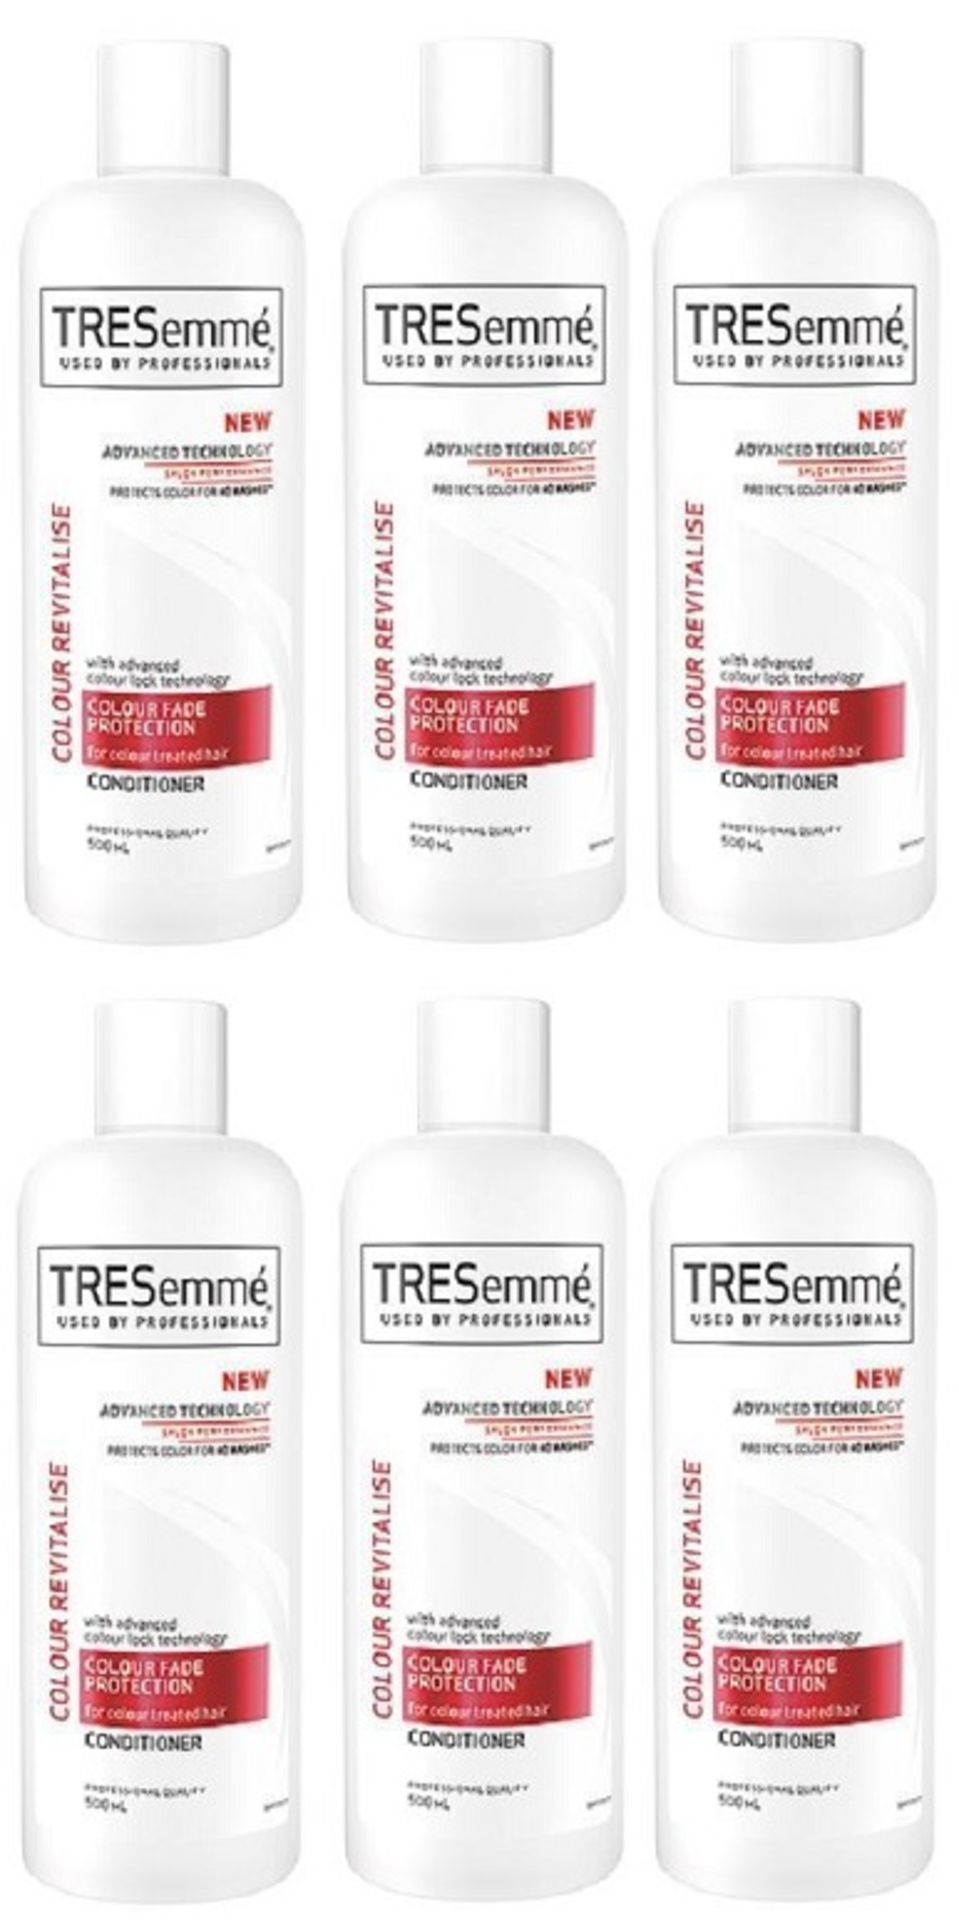 V *TRADE QTY* Brand New Lot Of 6 TRESemme Professional Colour Fade Protection Conditioner 500ml